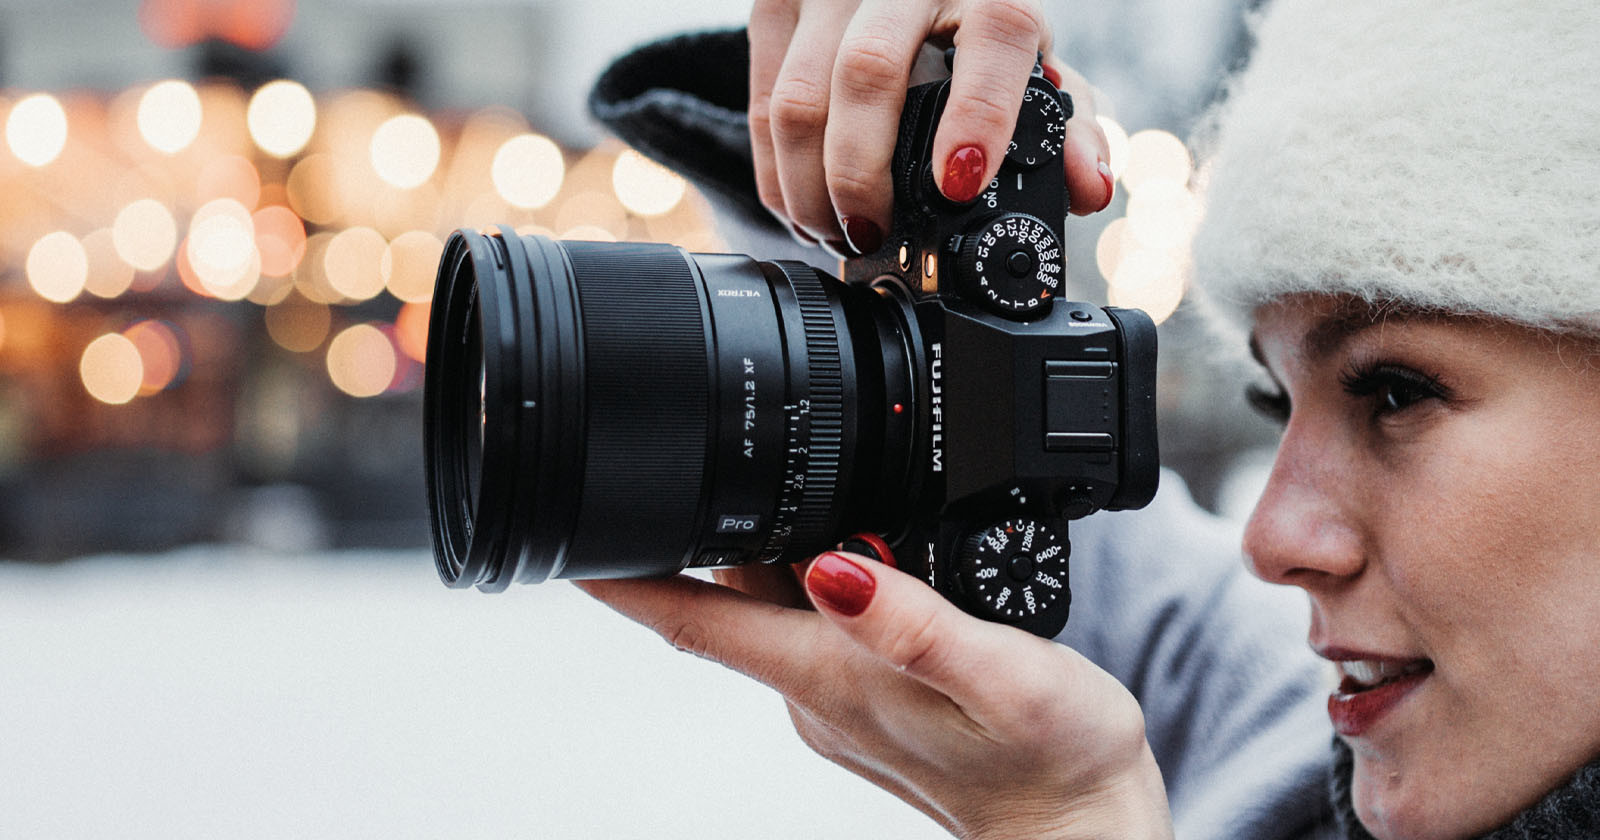 The Viltrox AF 75mm f/1.2 is a High-End Portrait Prime for Fujifilm X